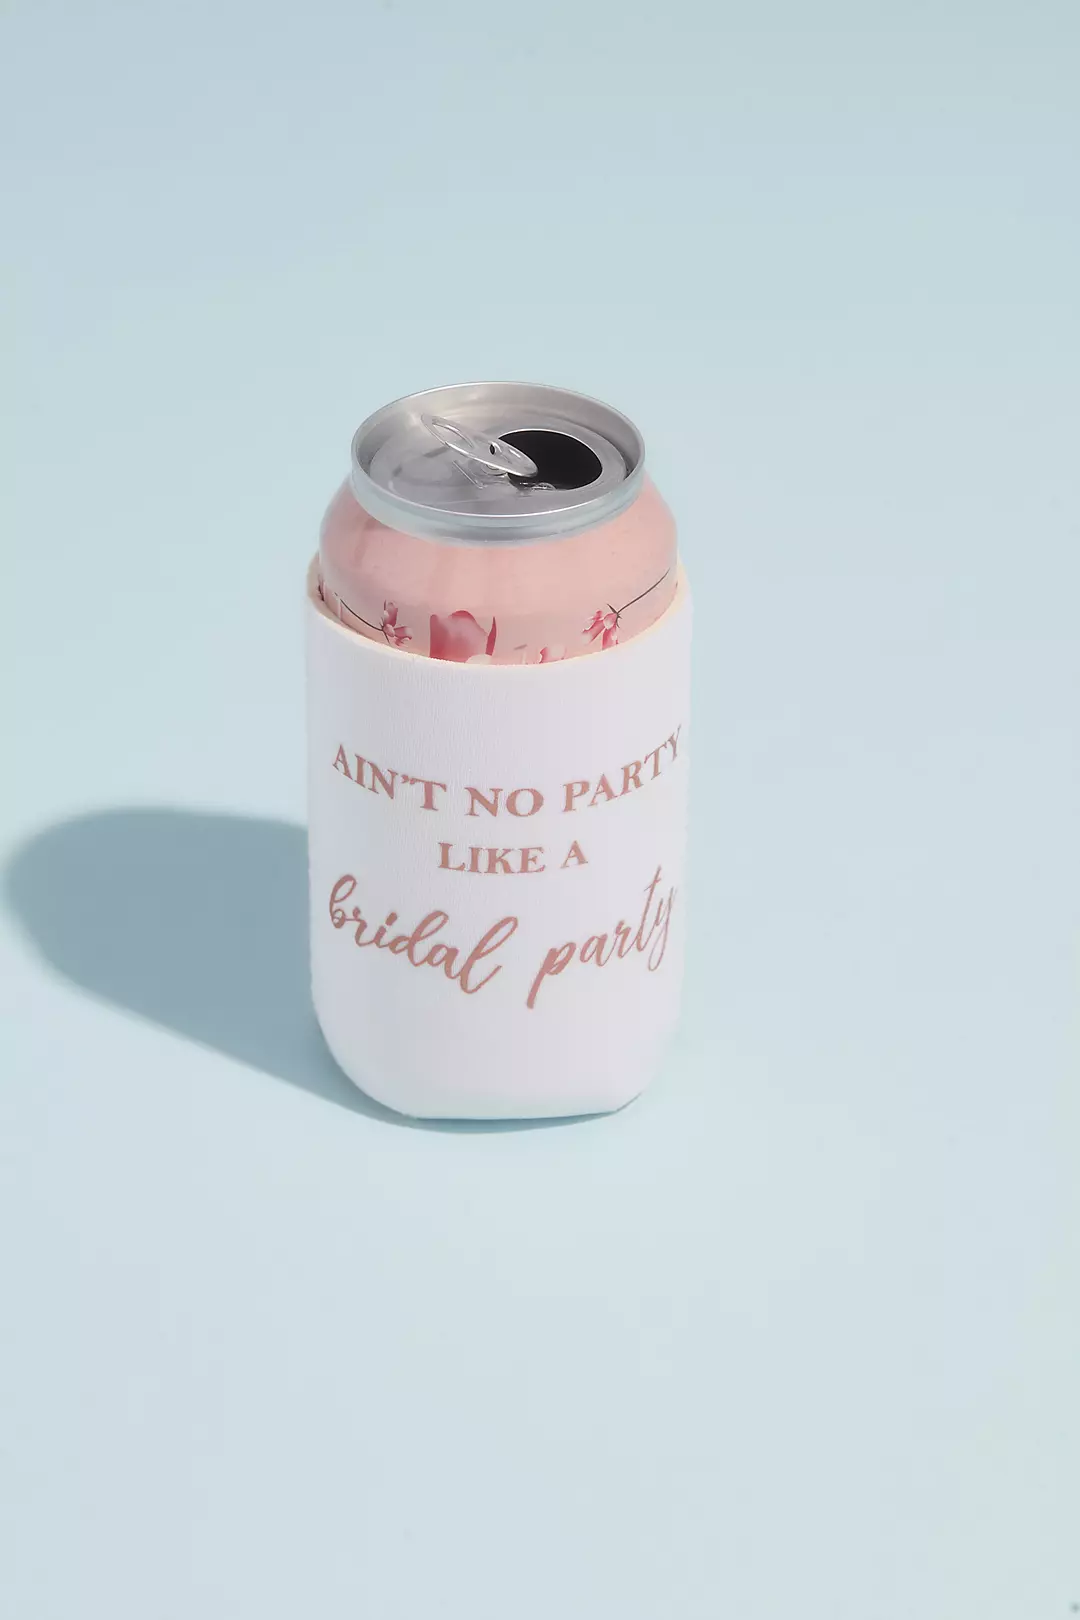 Aint No Party Like a Bridal Party Drink Sleeve Image